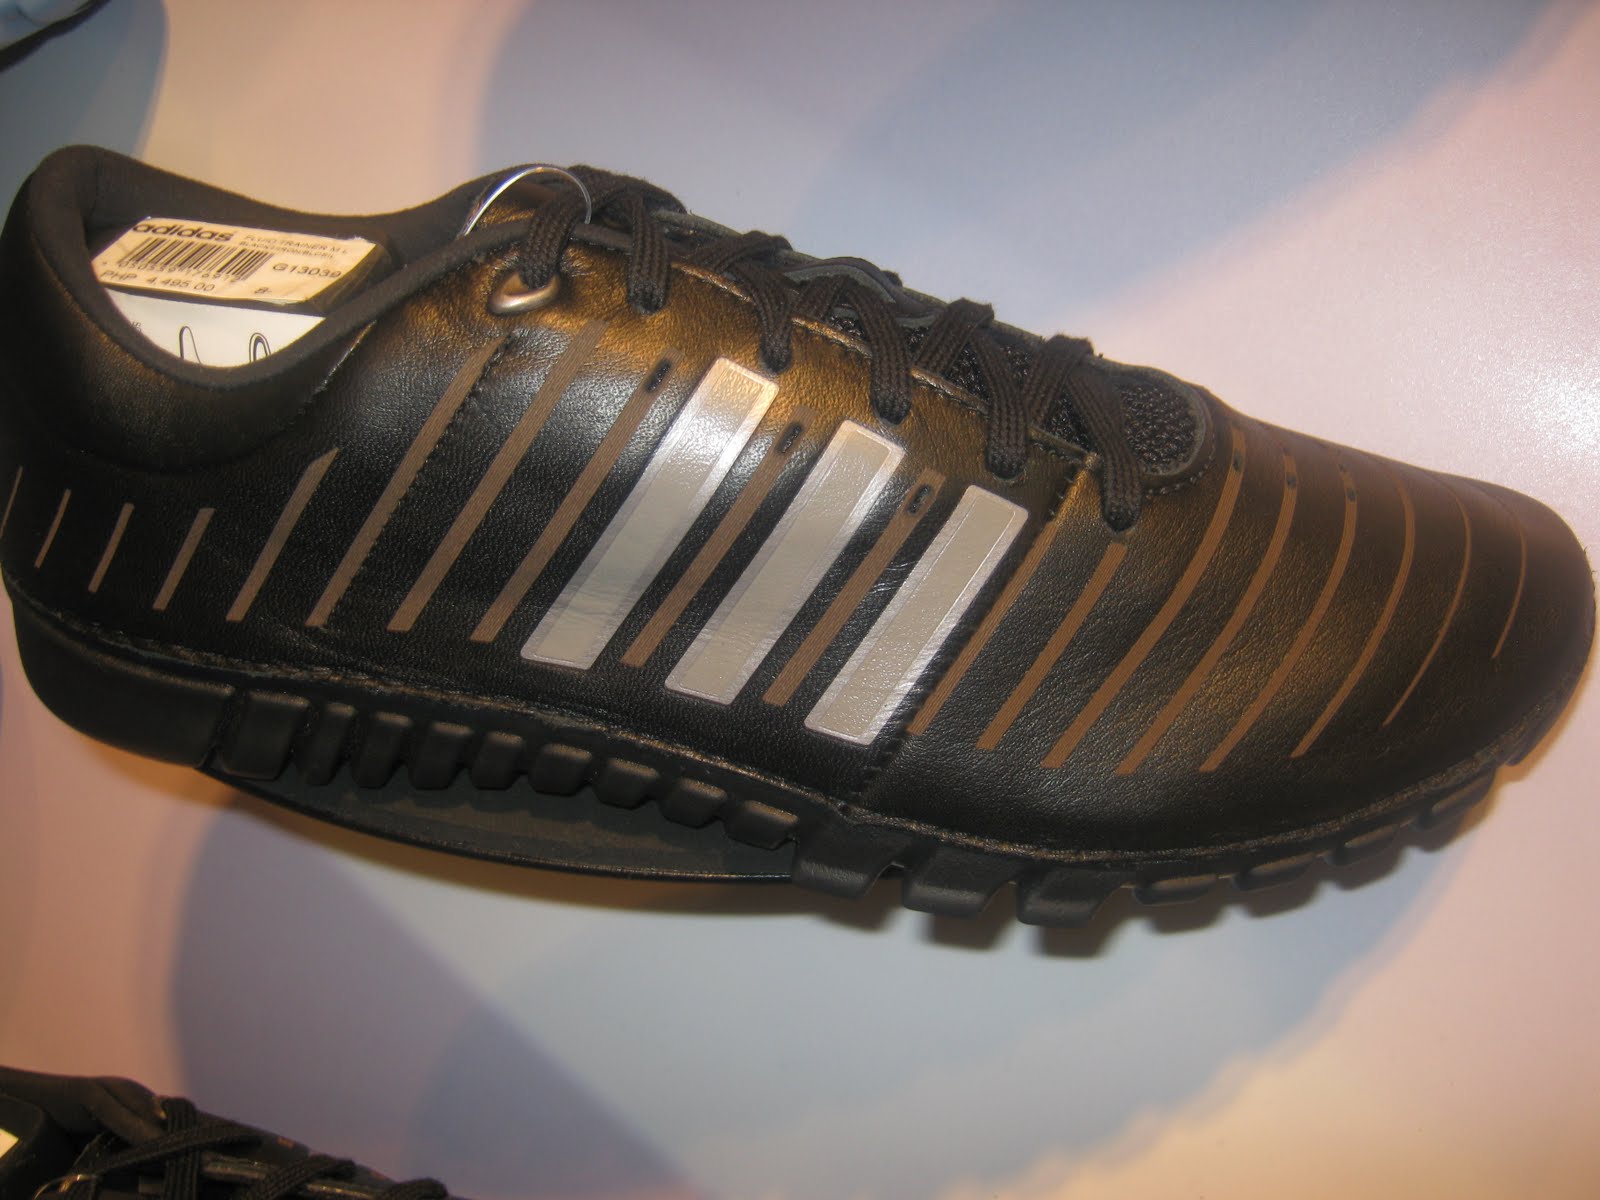 Pulido embrague Pobreza extrema L.E.N.S.(Lifestyle, Events, News, and Society)blogs: Adidas Launches Fluid  Trainer